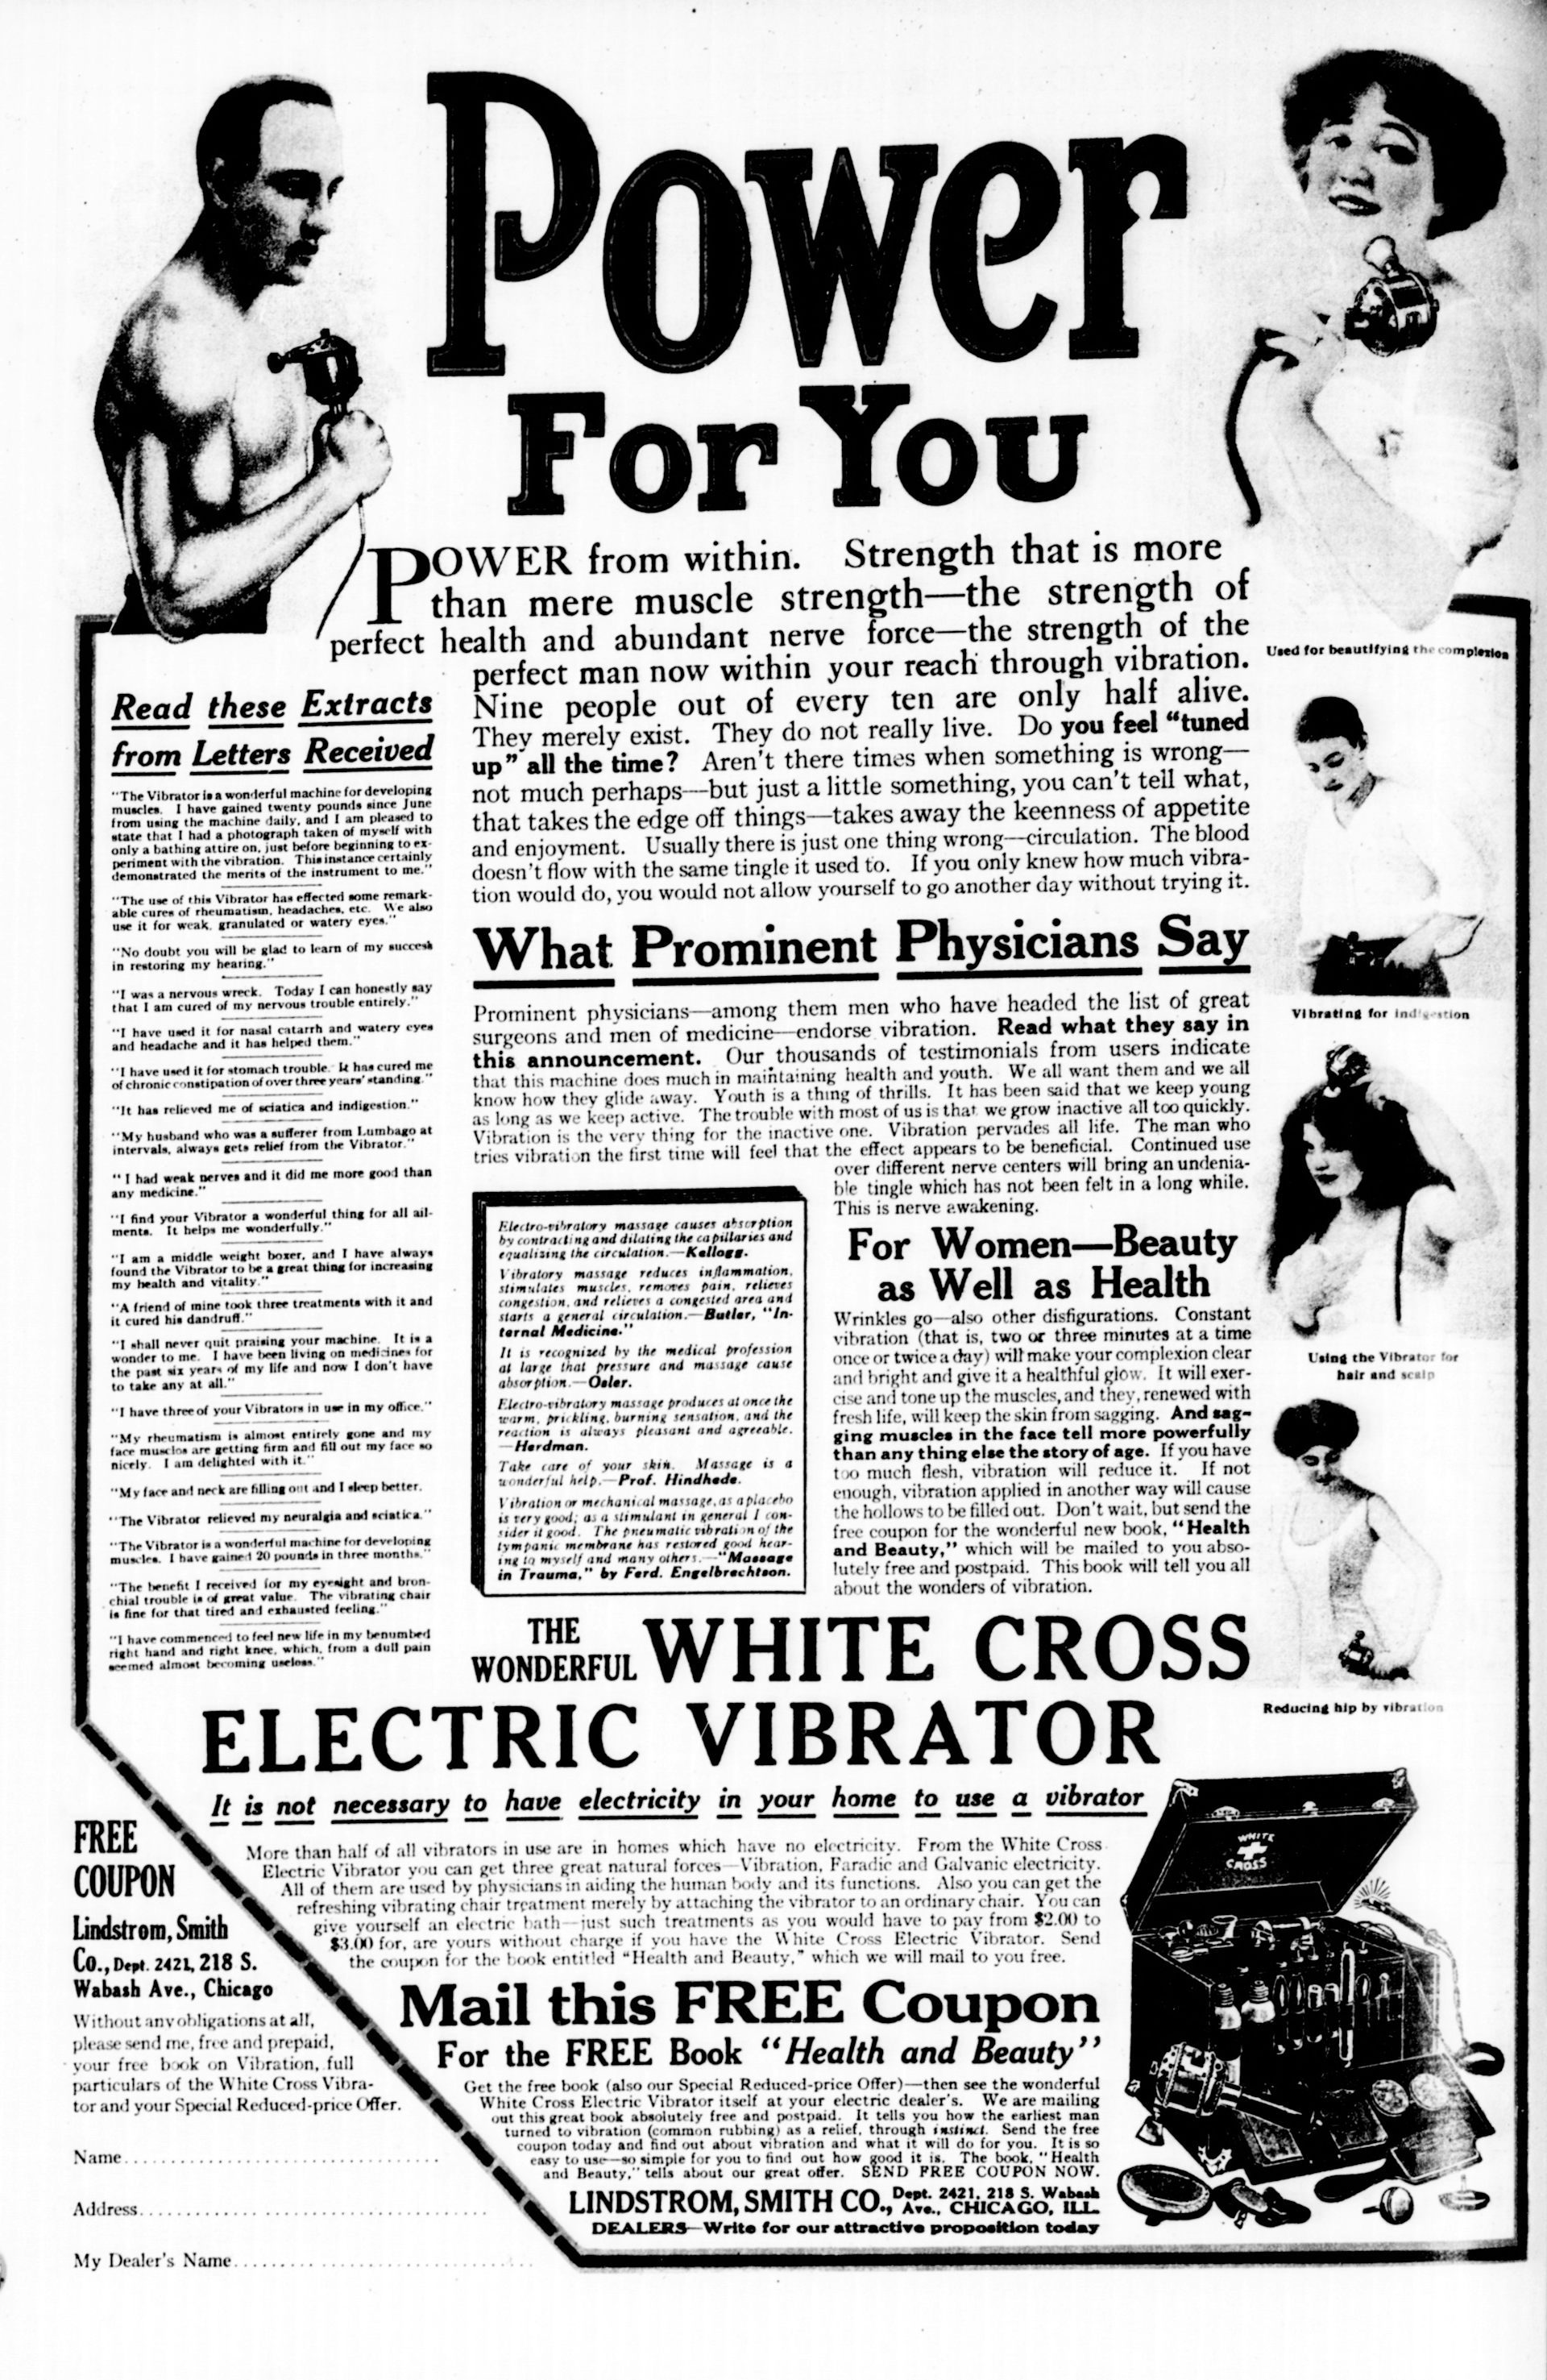 Vibrators had a long history as medical quackery before feminists rebranded them as sex toys picture photo